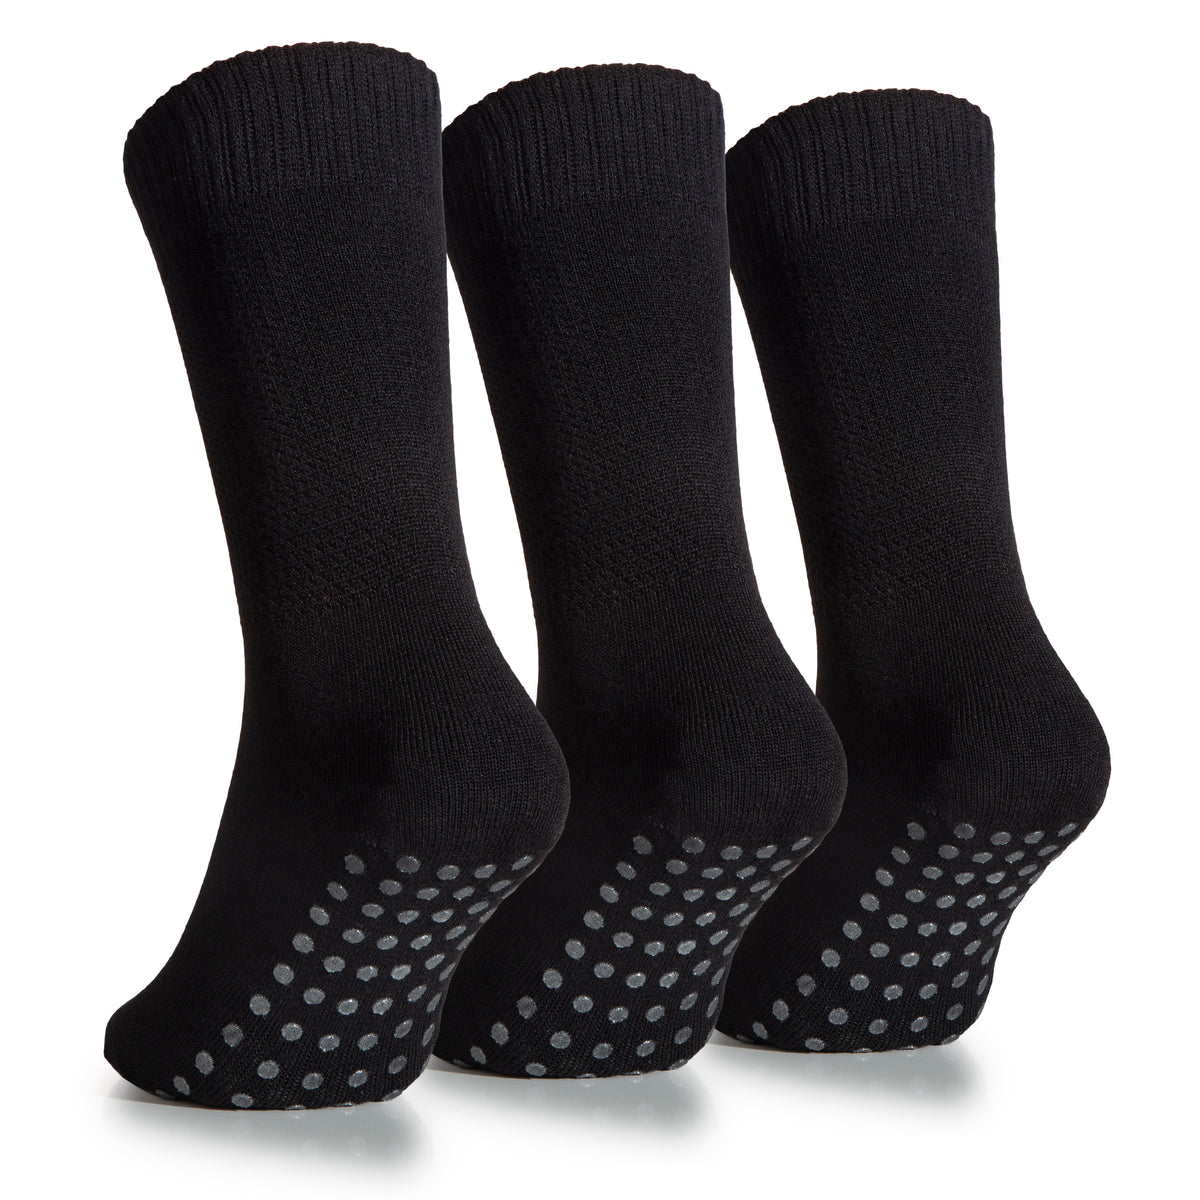 This image depicts three Women's Bamboo Diabetic Ankle Non Slip Grip Socks. The socks are black with dots on them.